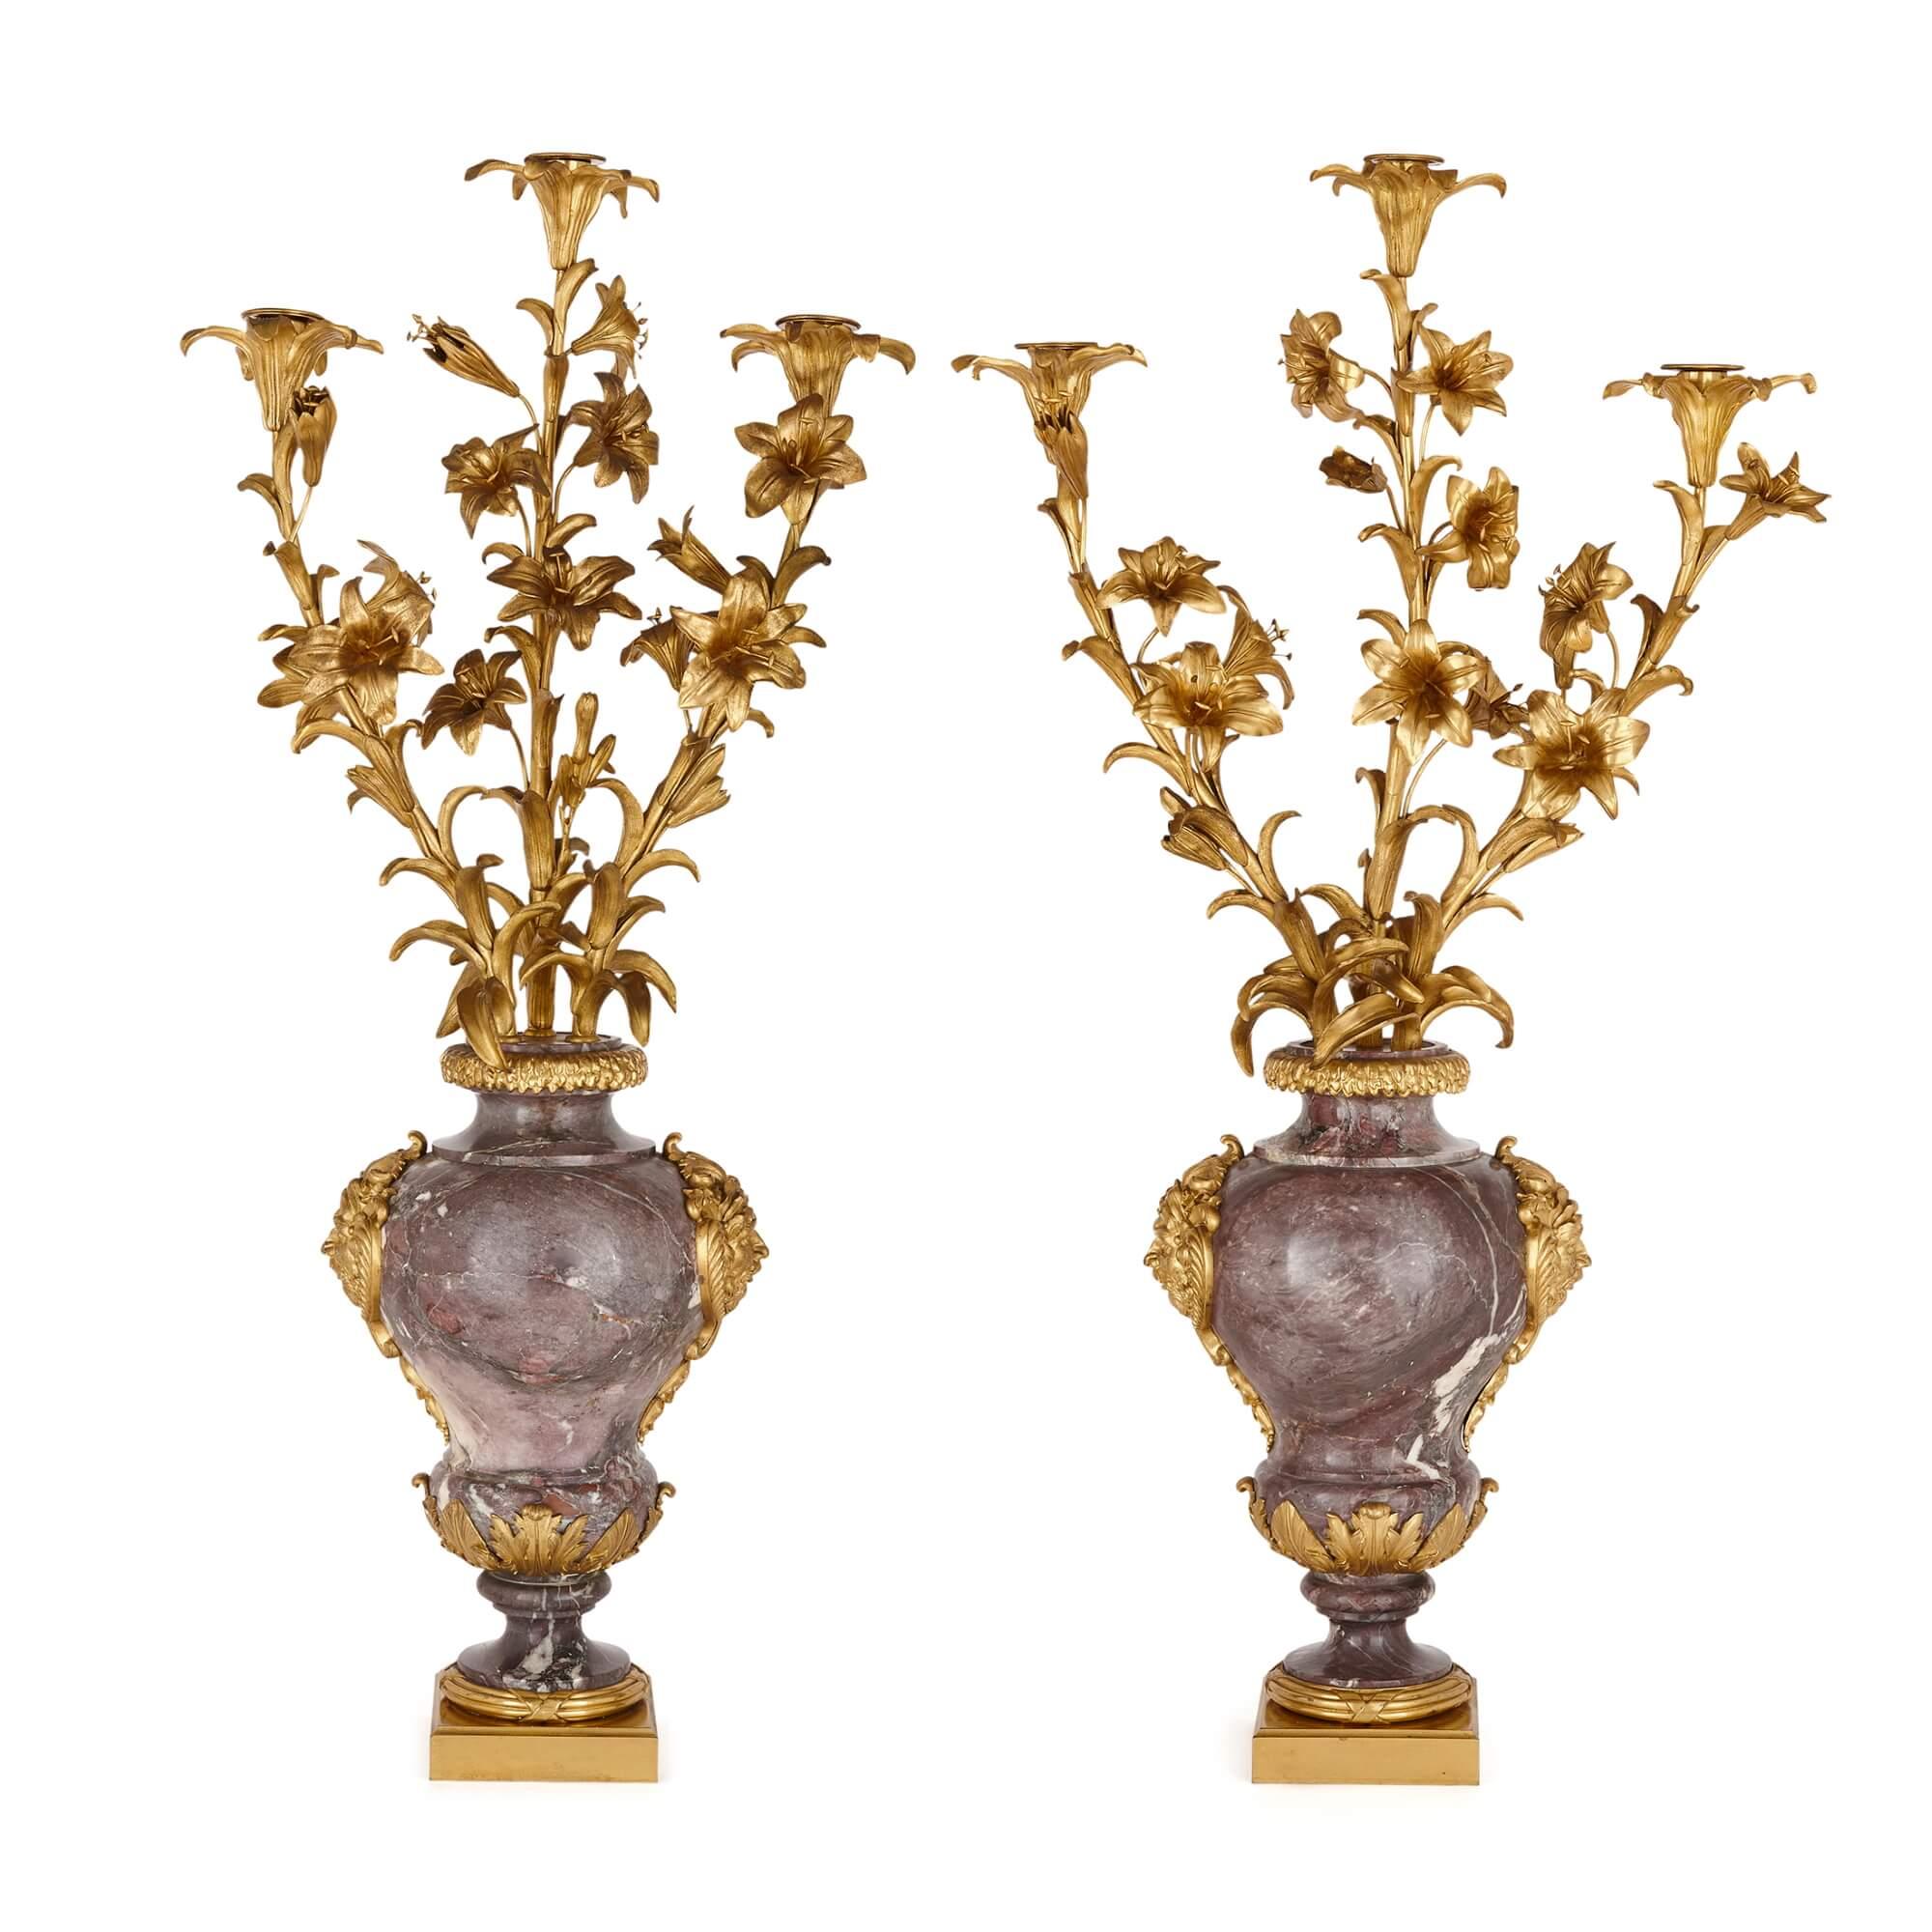 Pair of large Rococo style gilt-bronze and marble candelabra
French, Late 19th Century
Measures: height 106cm, width 46/53cm, depth 23cm

These superb antique candelabra were made in the late nineteenth century in the Louis XV or Rococo style,